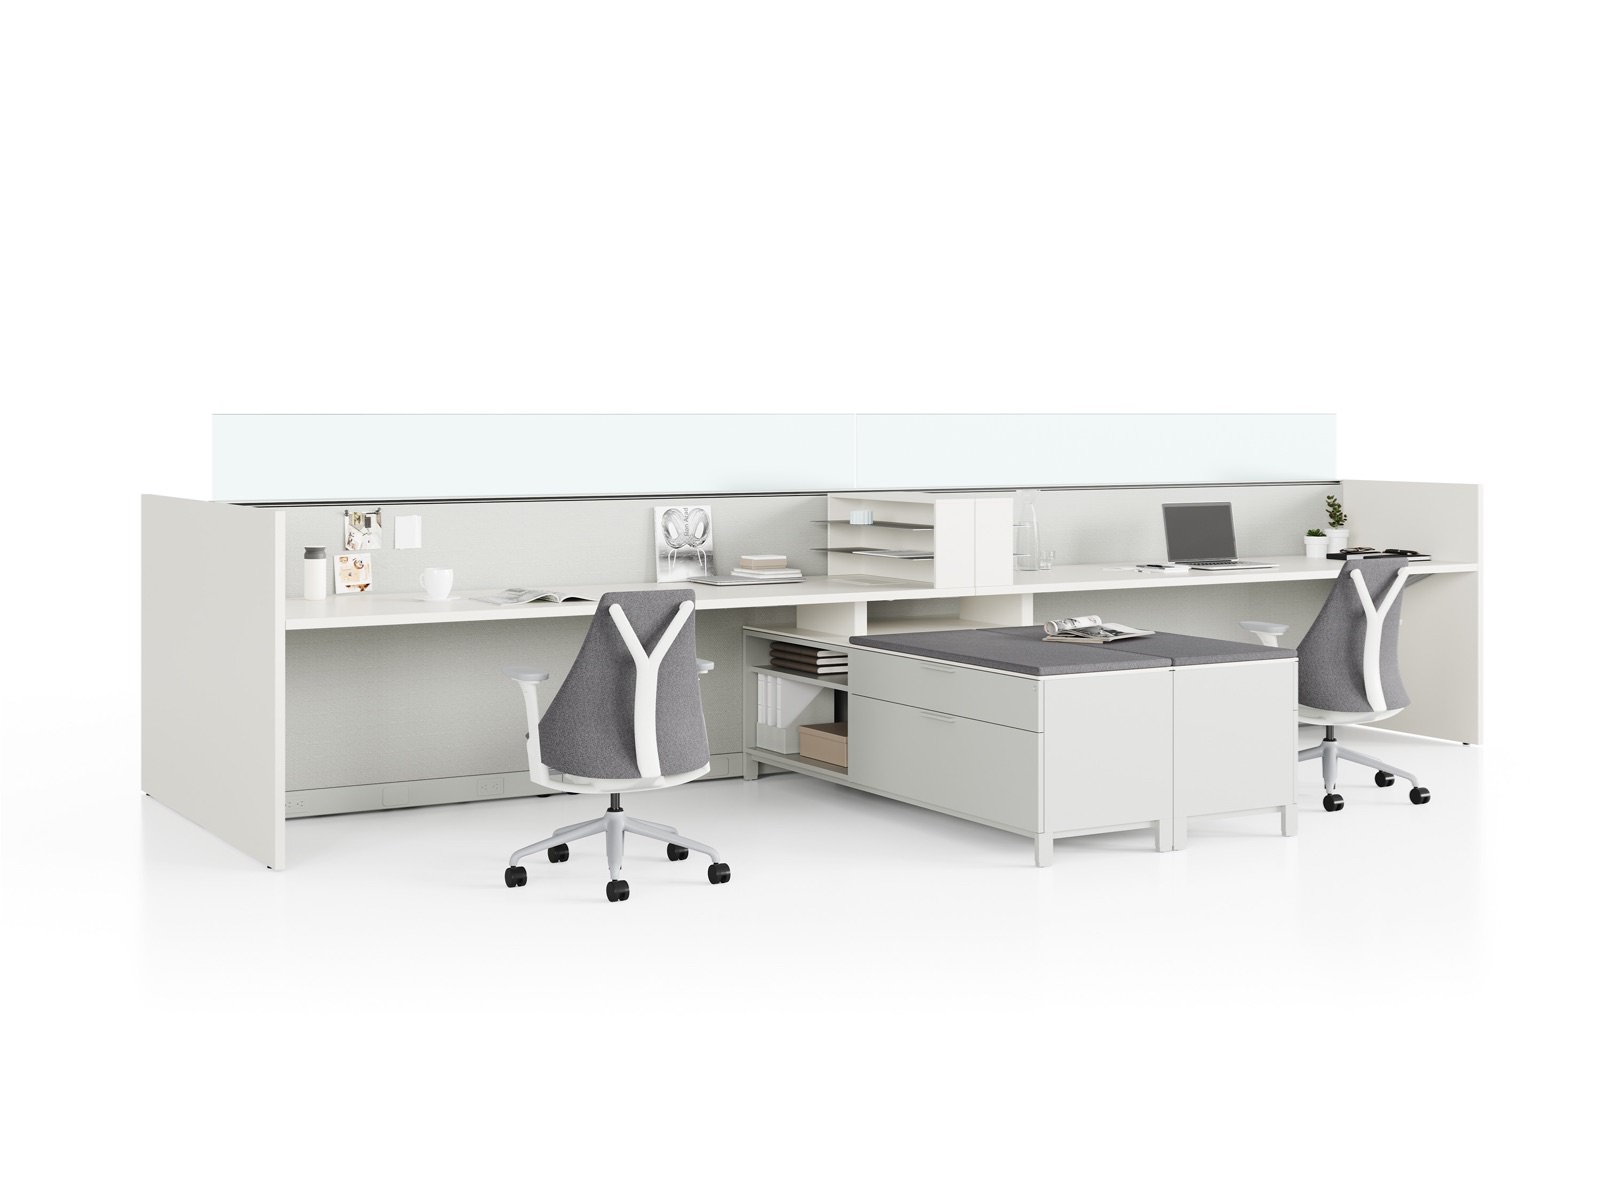 Two grey Canvas Wall workstations with lower storage, glass screens, and Sayl chairs.